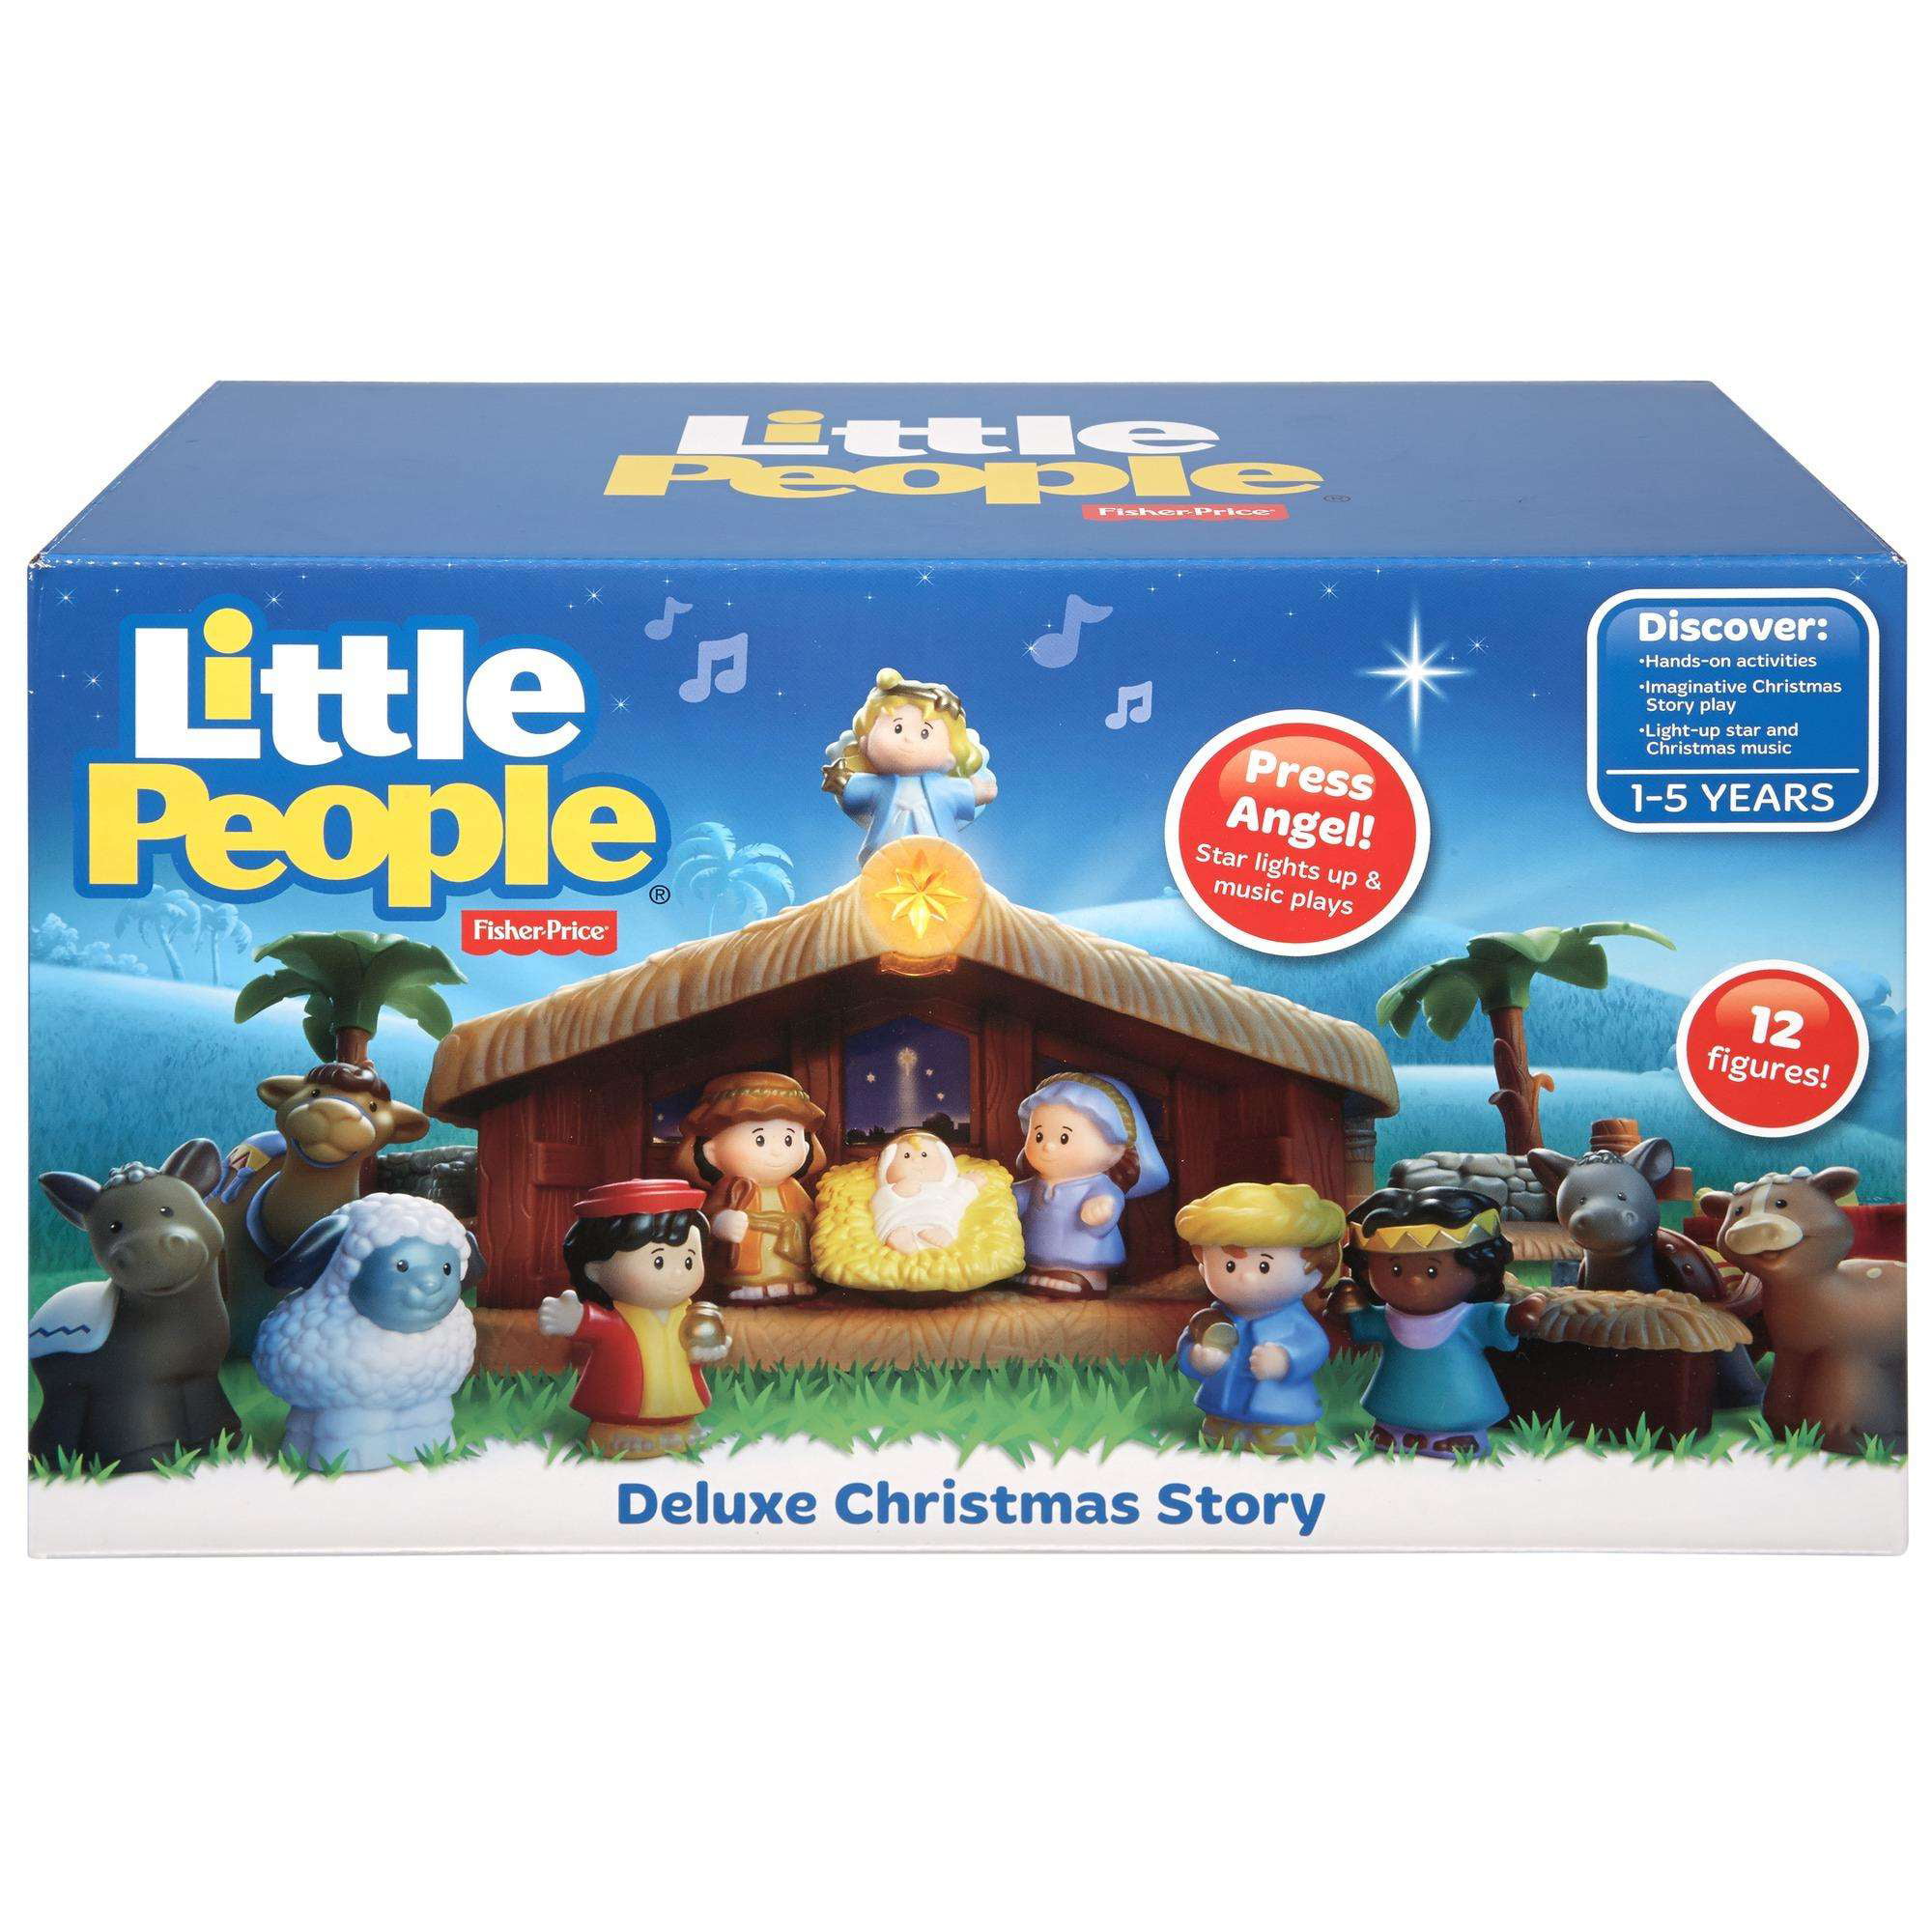 Fisher Price LITTLE PEOPLE DELUXE CHRISTMAS NATIVITY STORY Toy NEW 12 figures 